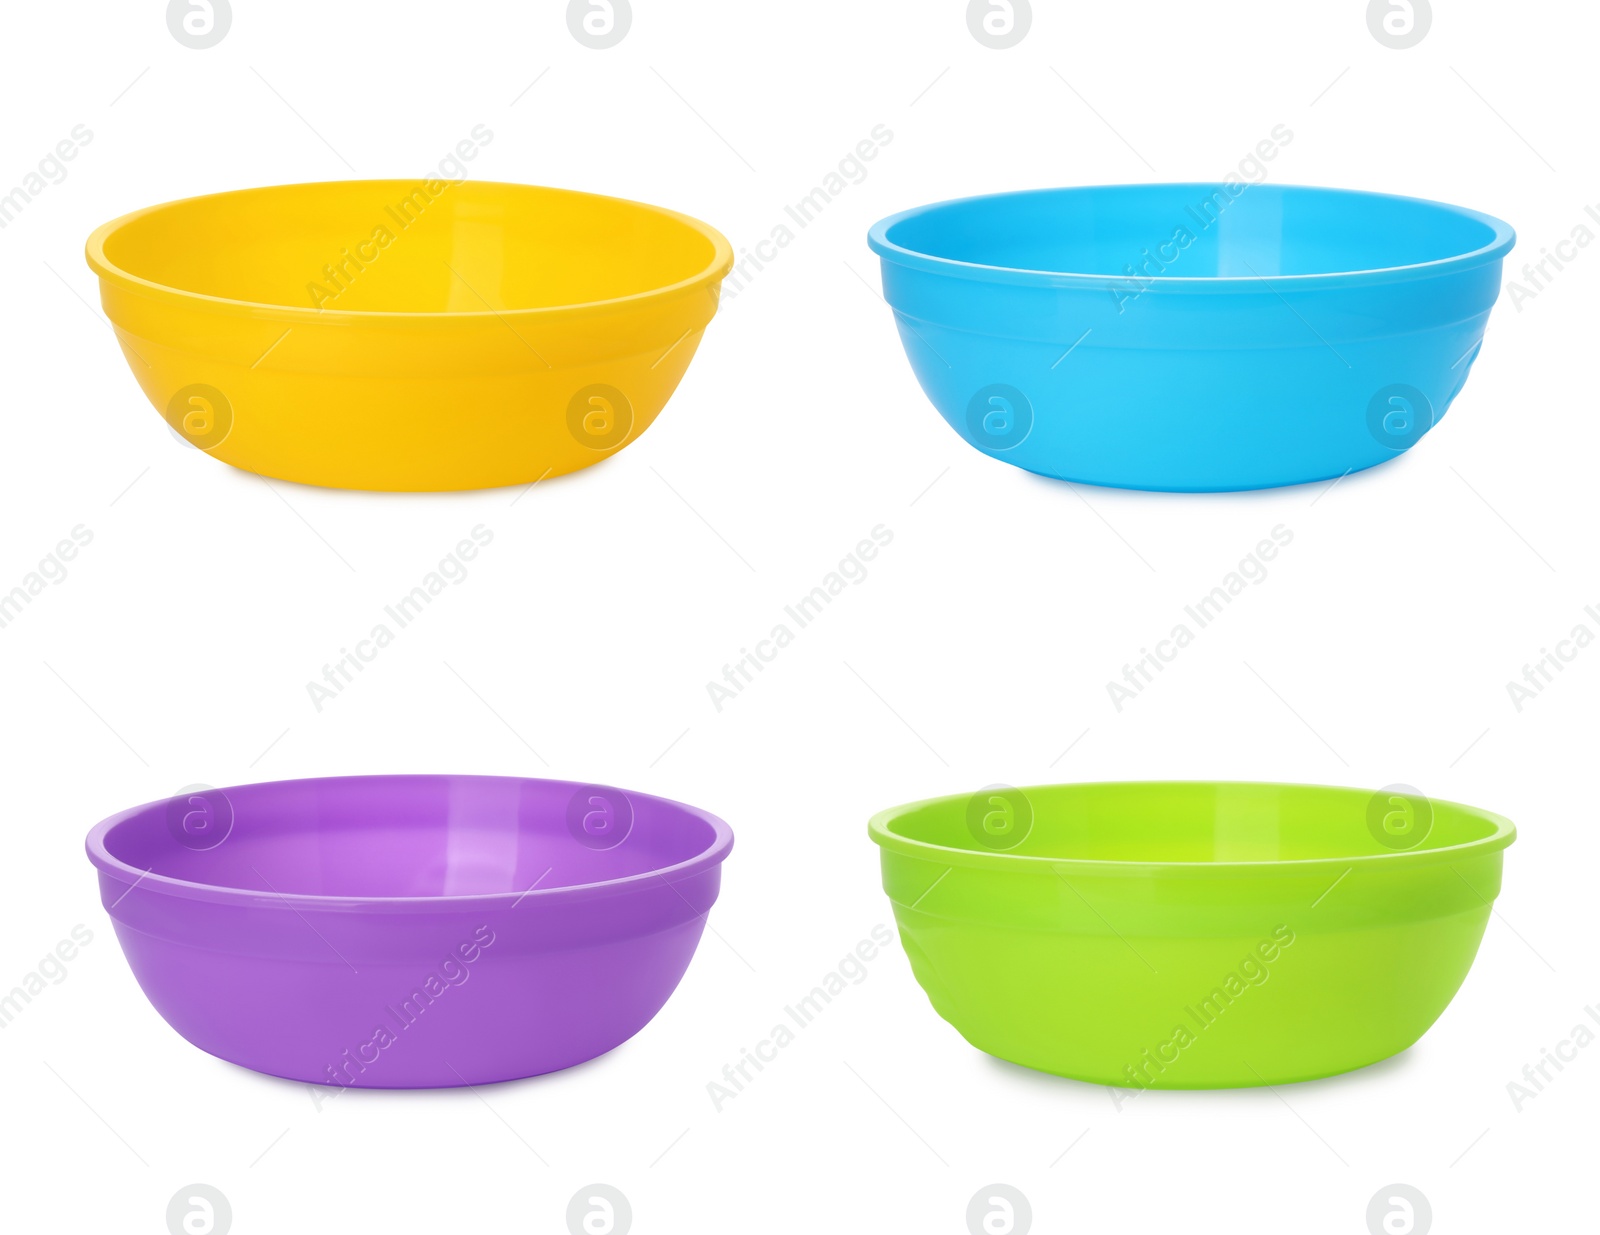 Image of Set with colorful bowls on white background. Serving baby food